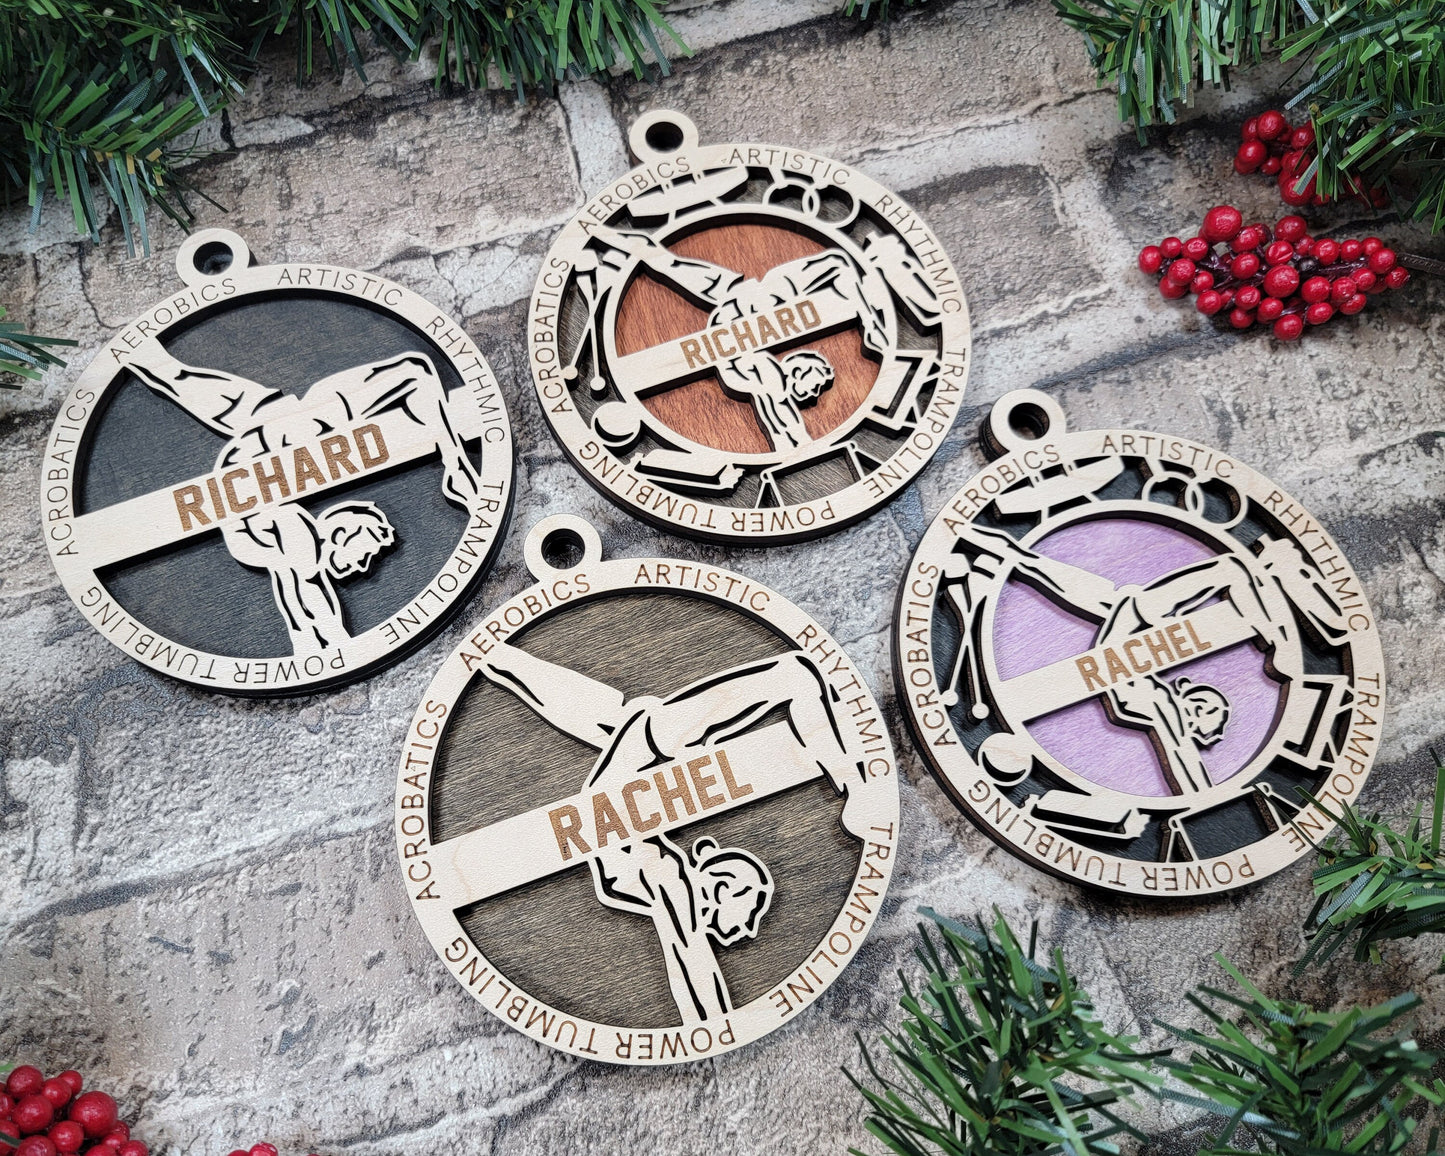 Gymnastics Sports Ornaments - Laser cut and engraved decorations